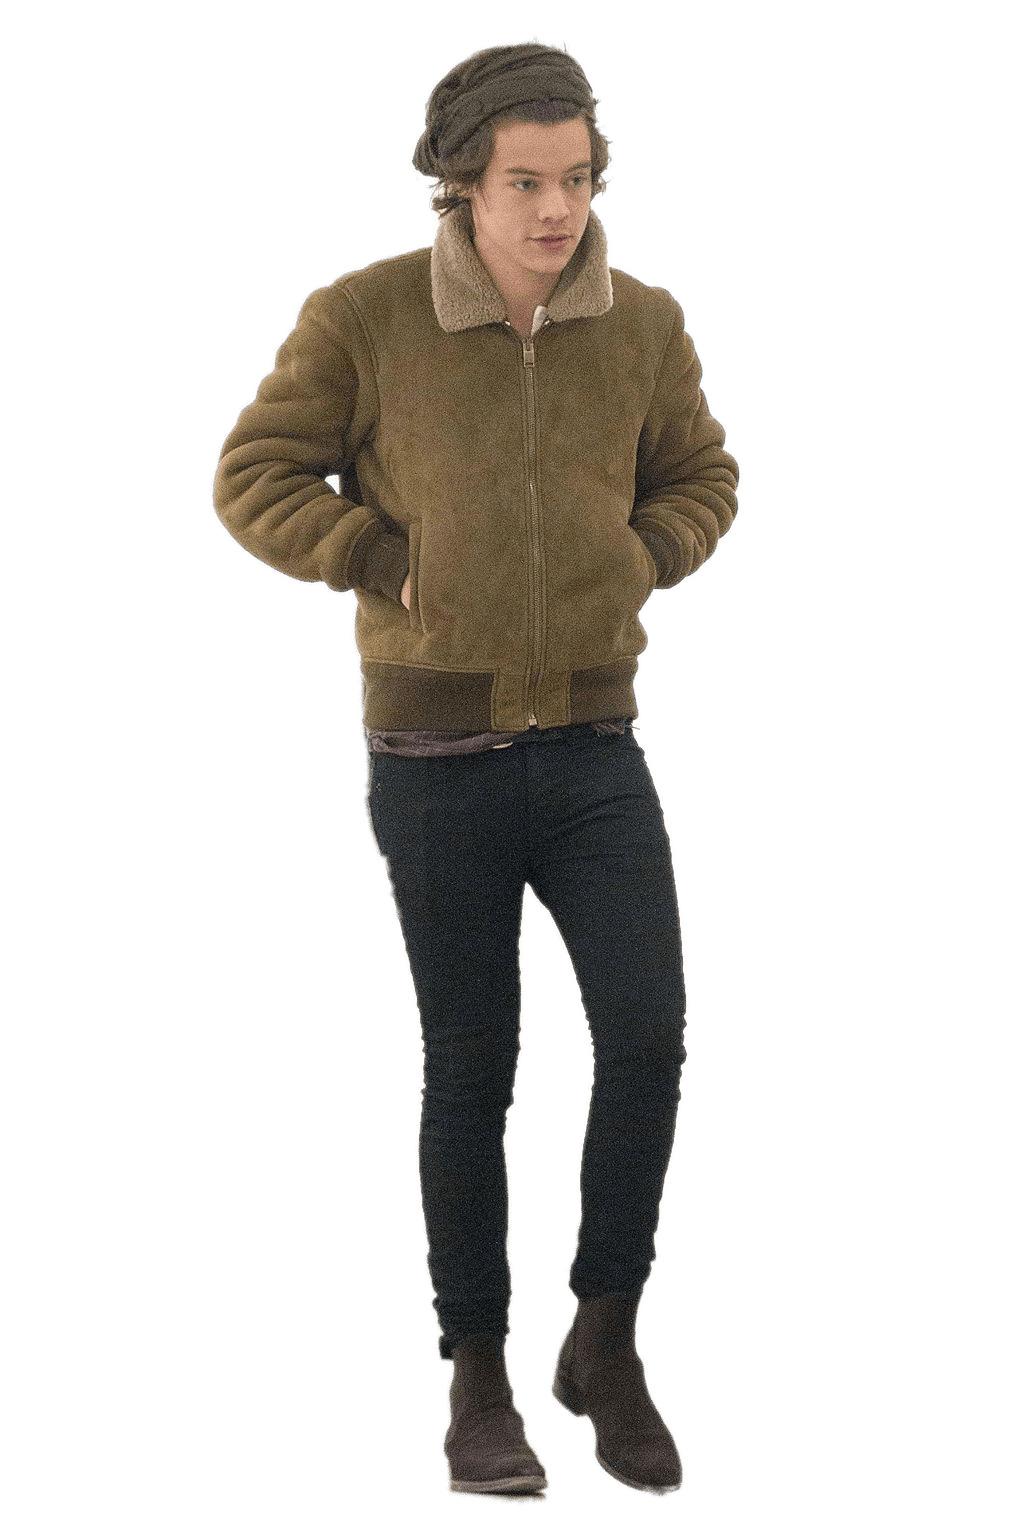 Harry Styles Full Size png transparent